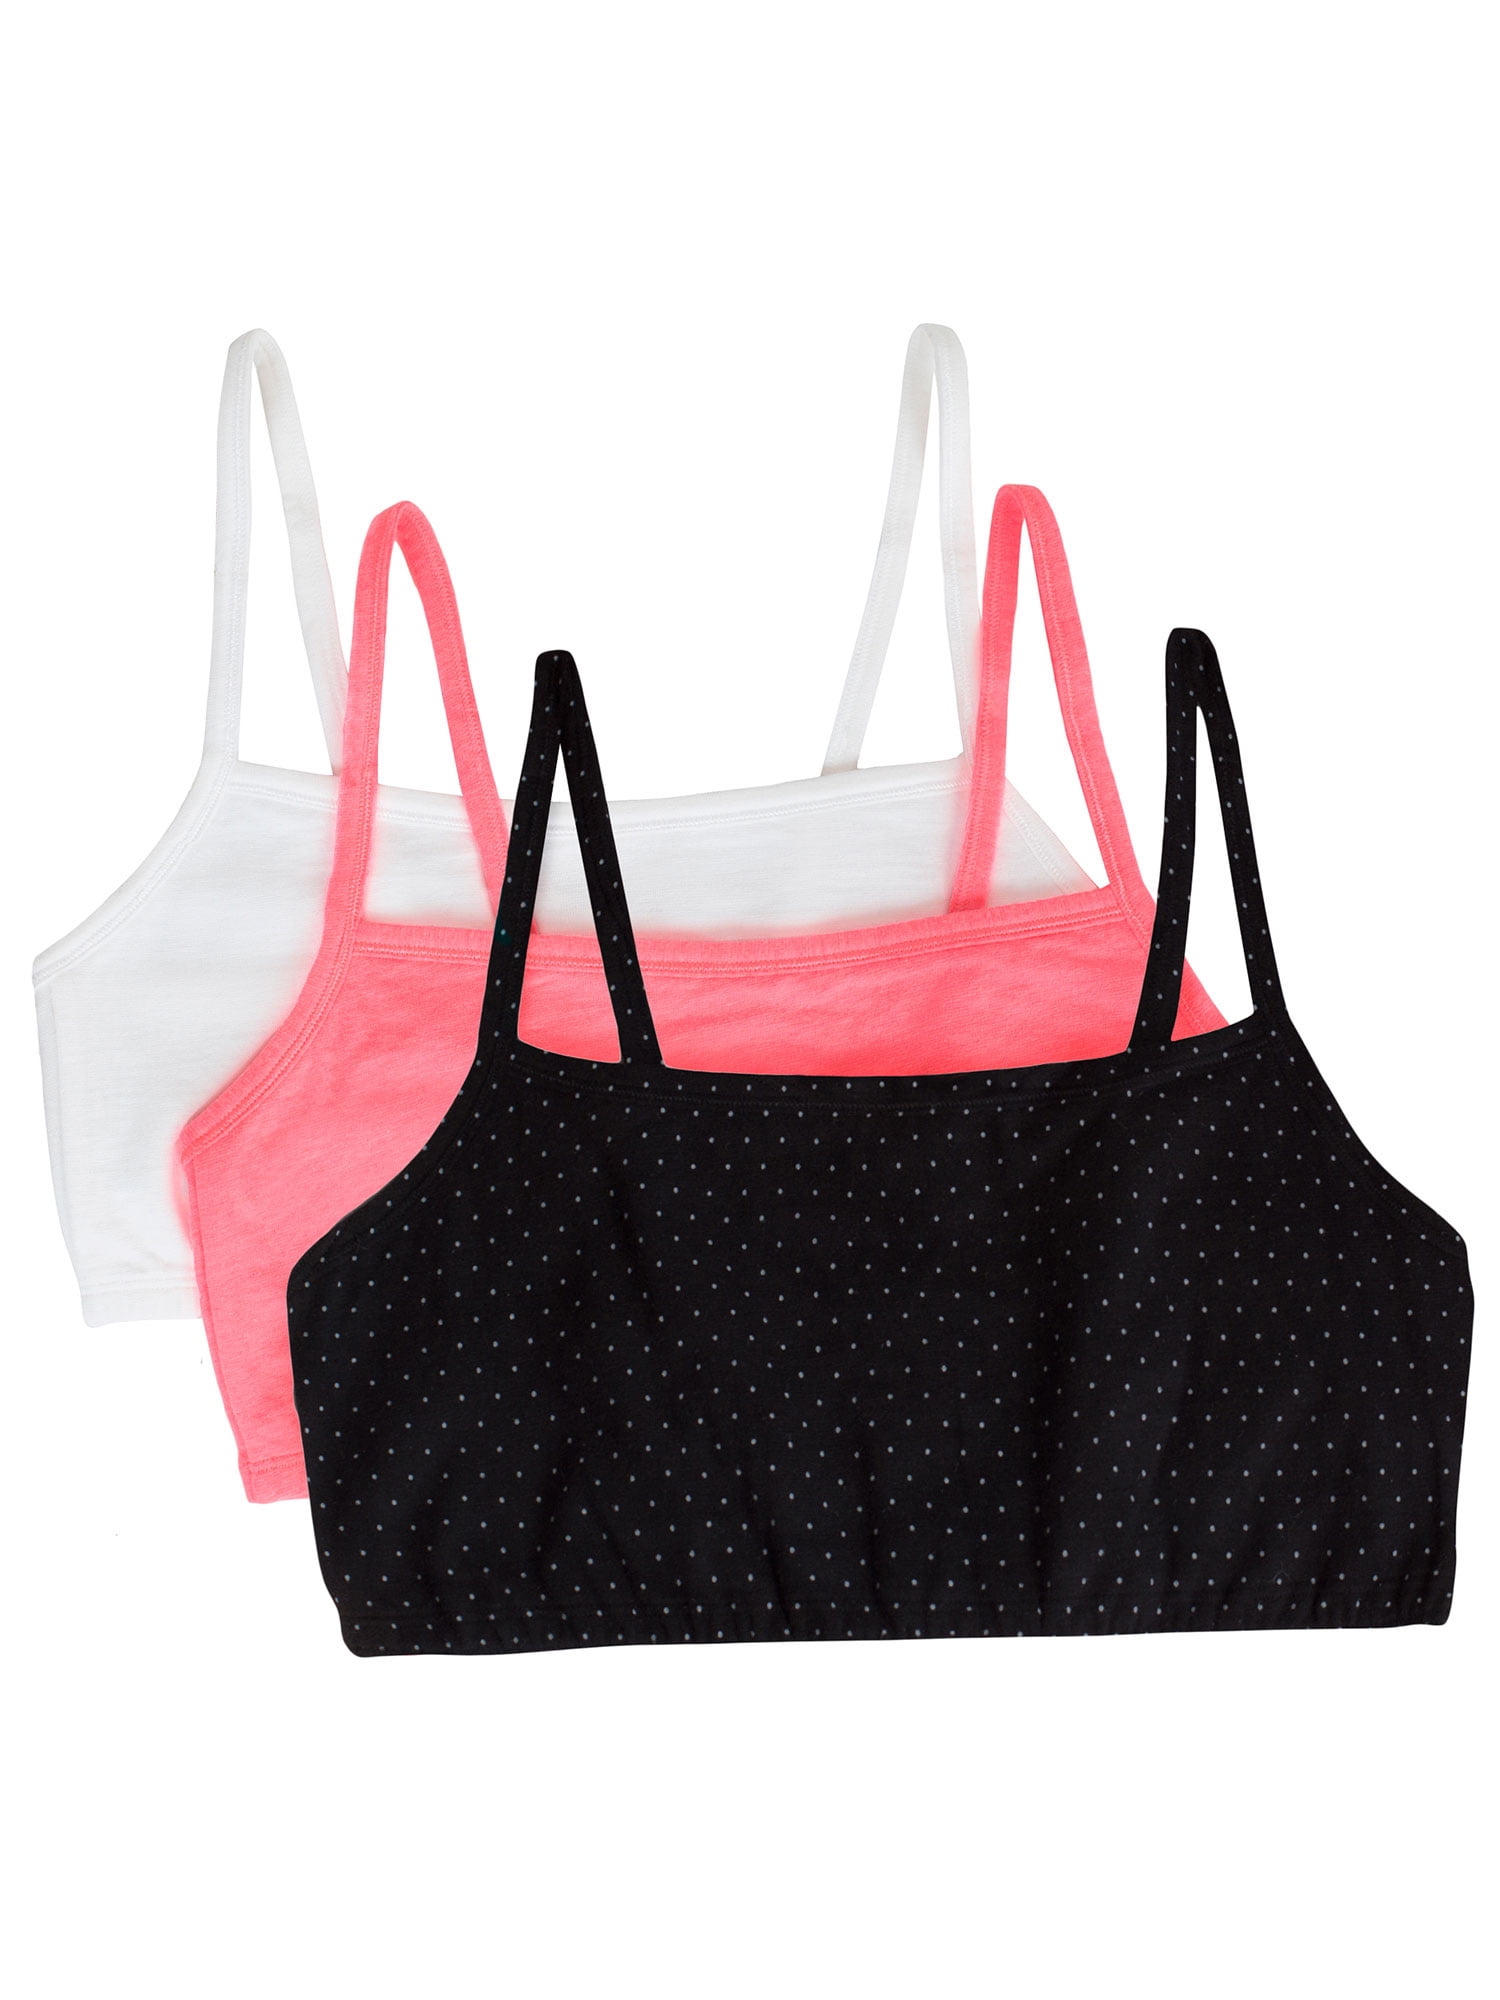 Pack of 3 Fruit of the Loom Big Girls CottonConvertible Bralette